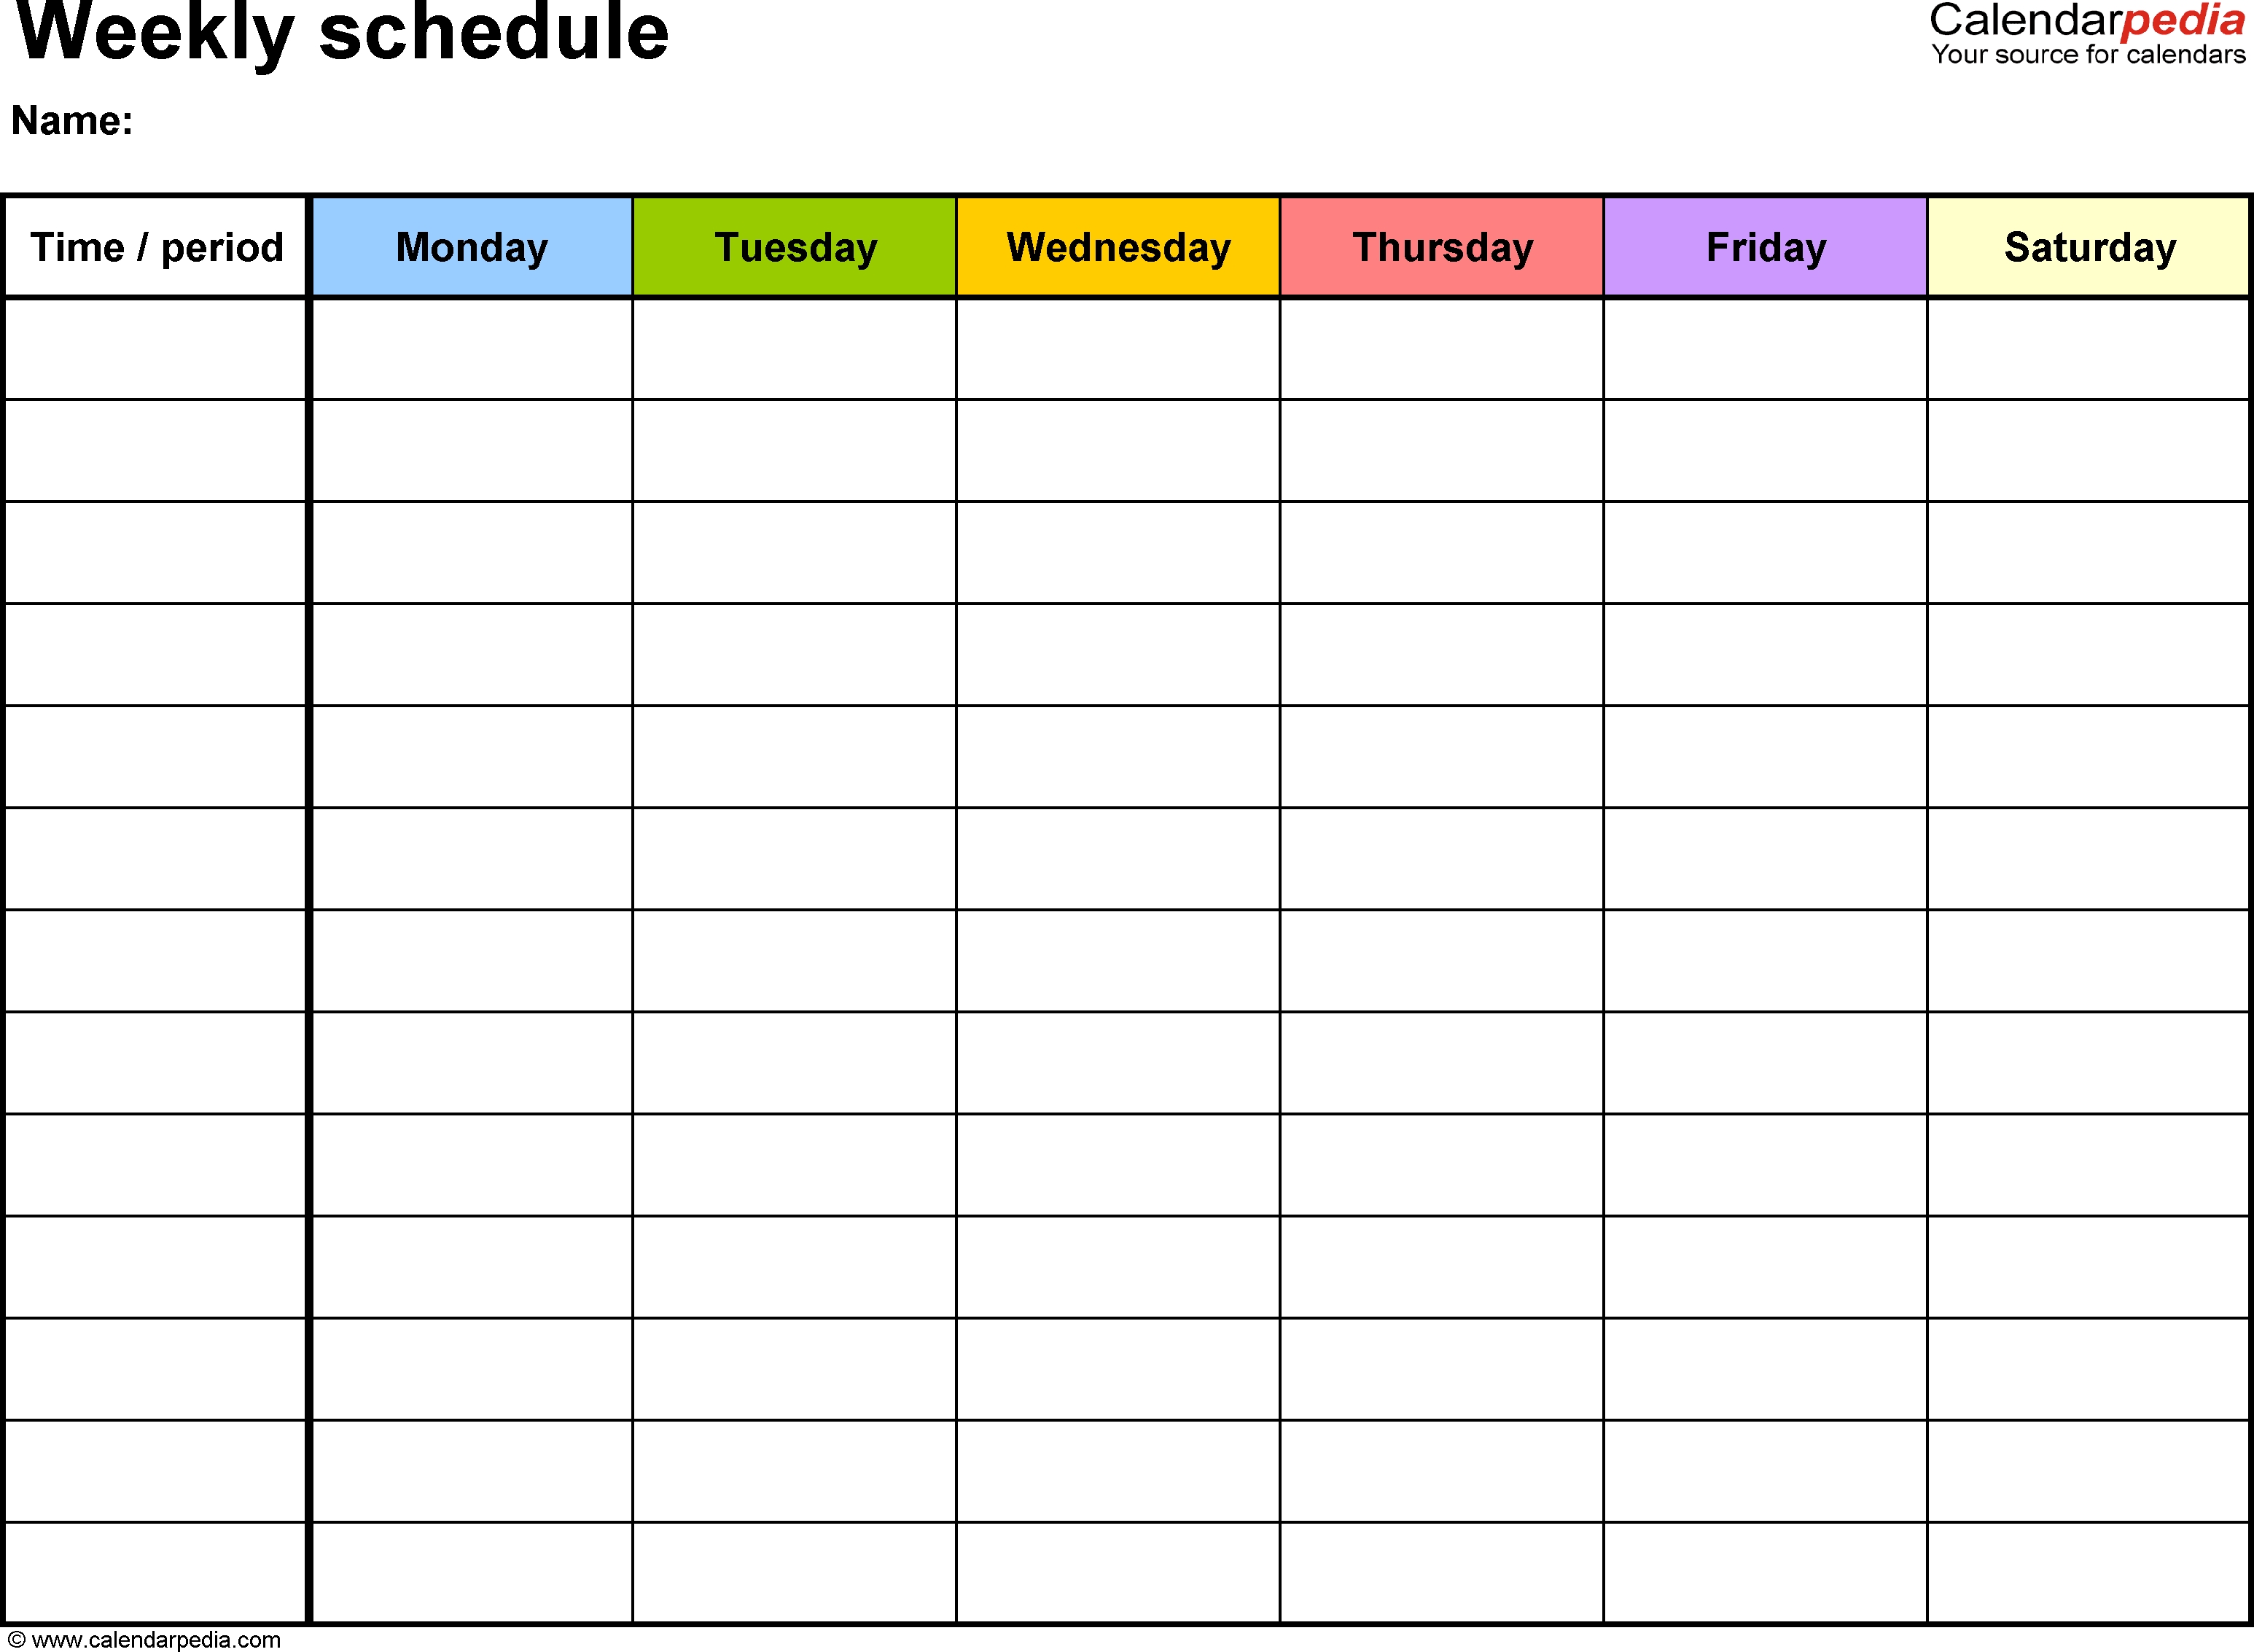 Free Weekly Schedule Templates For Word - 18 Templates Perky Printable Blank Caldendar Monday - Friday